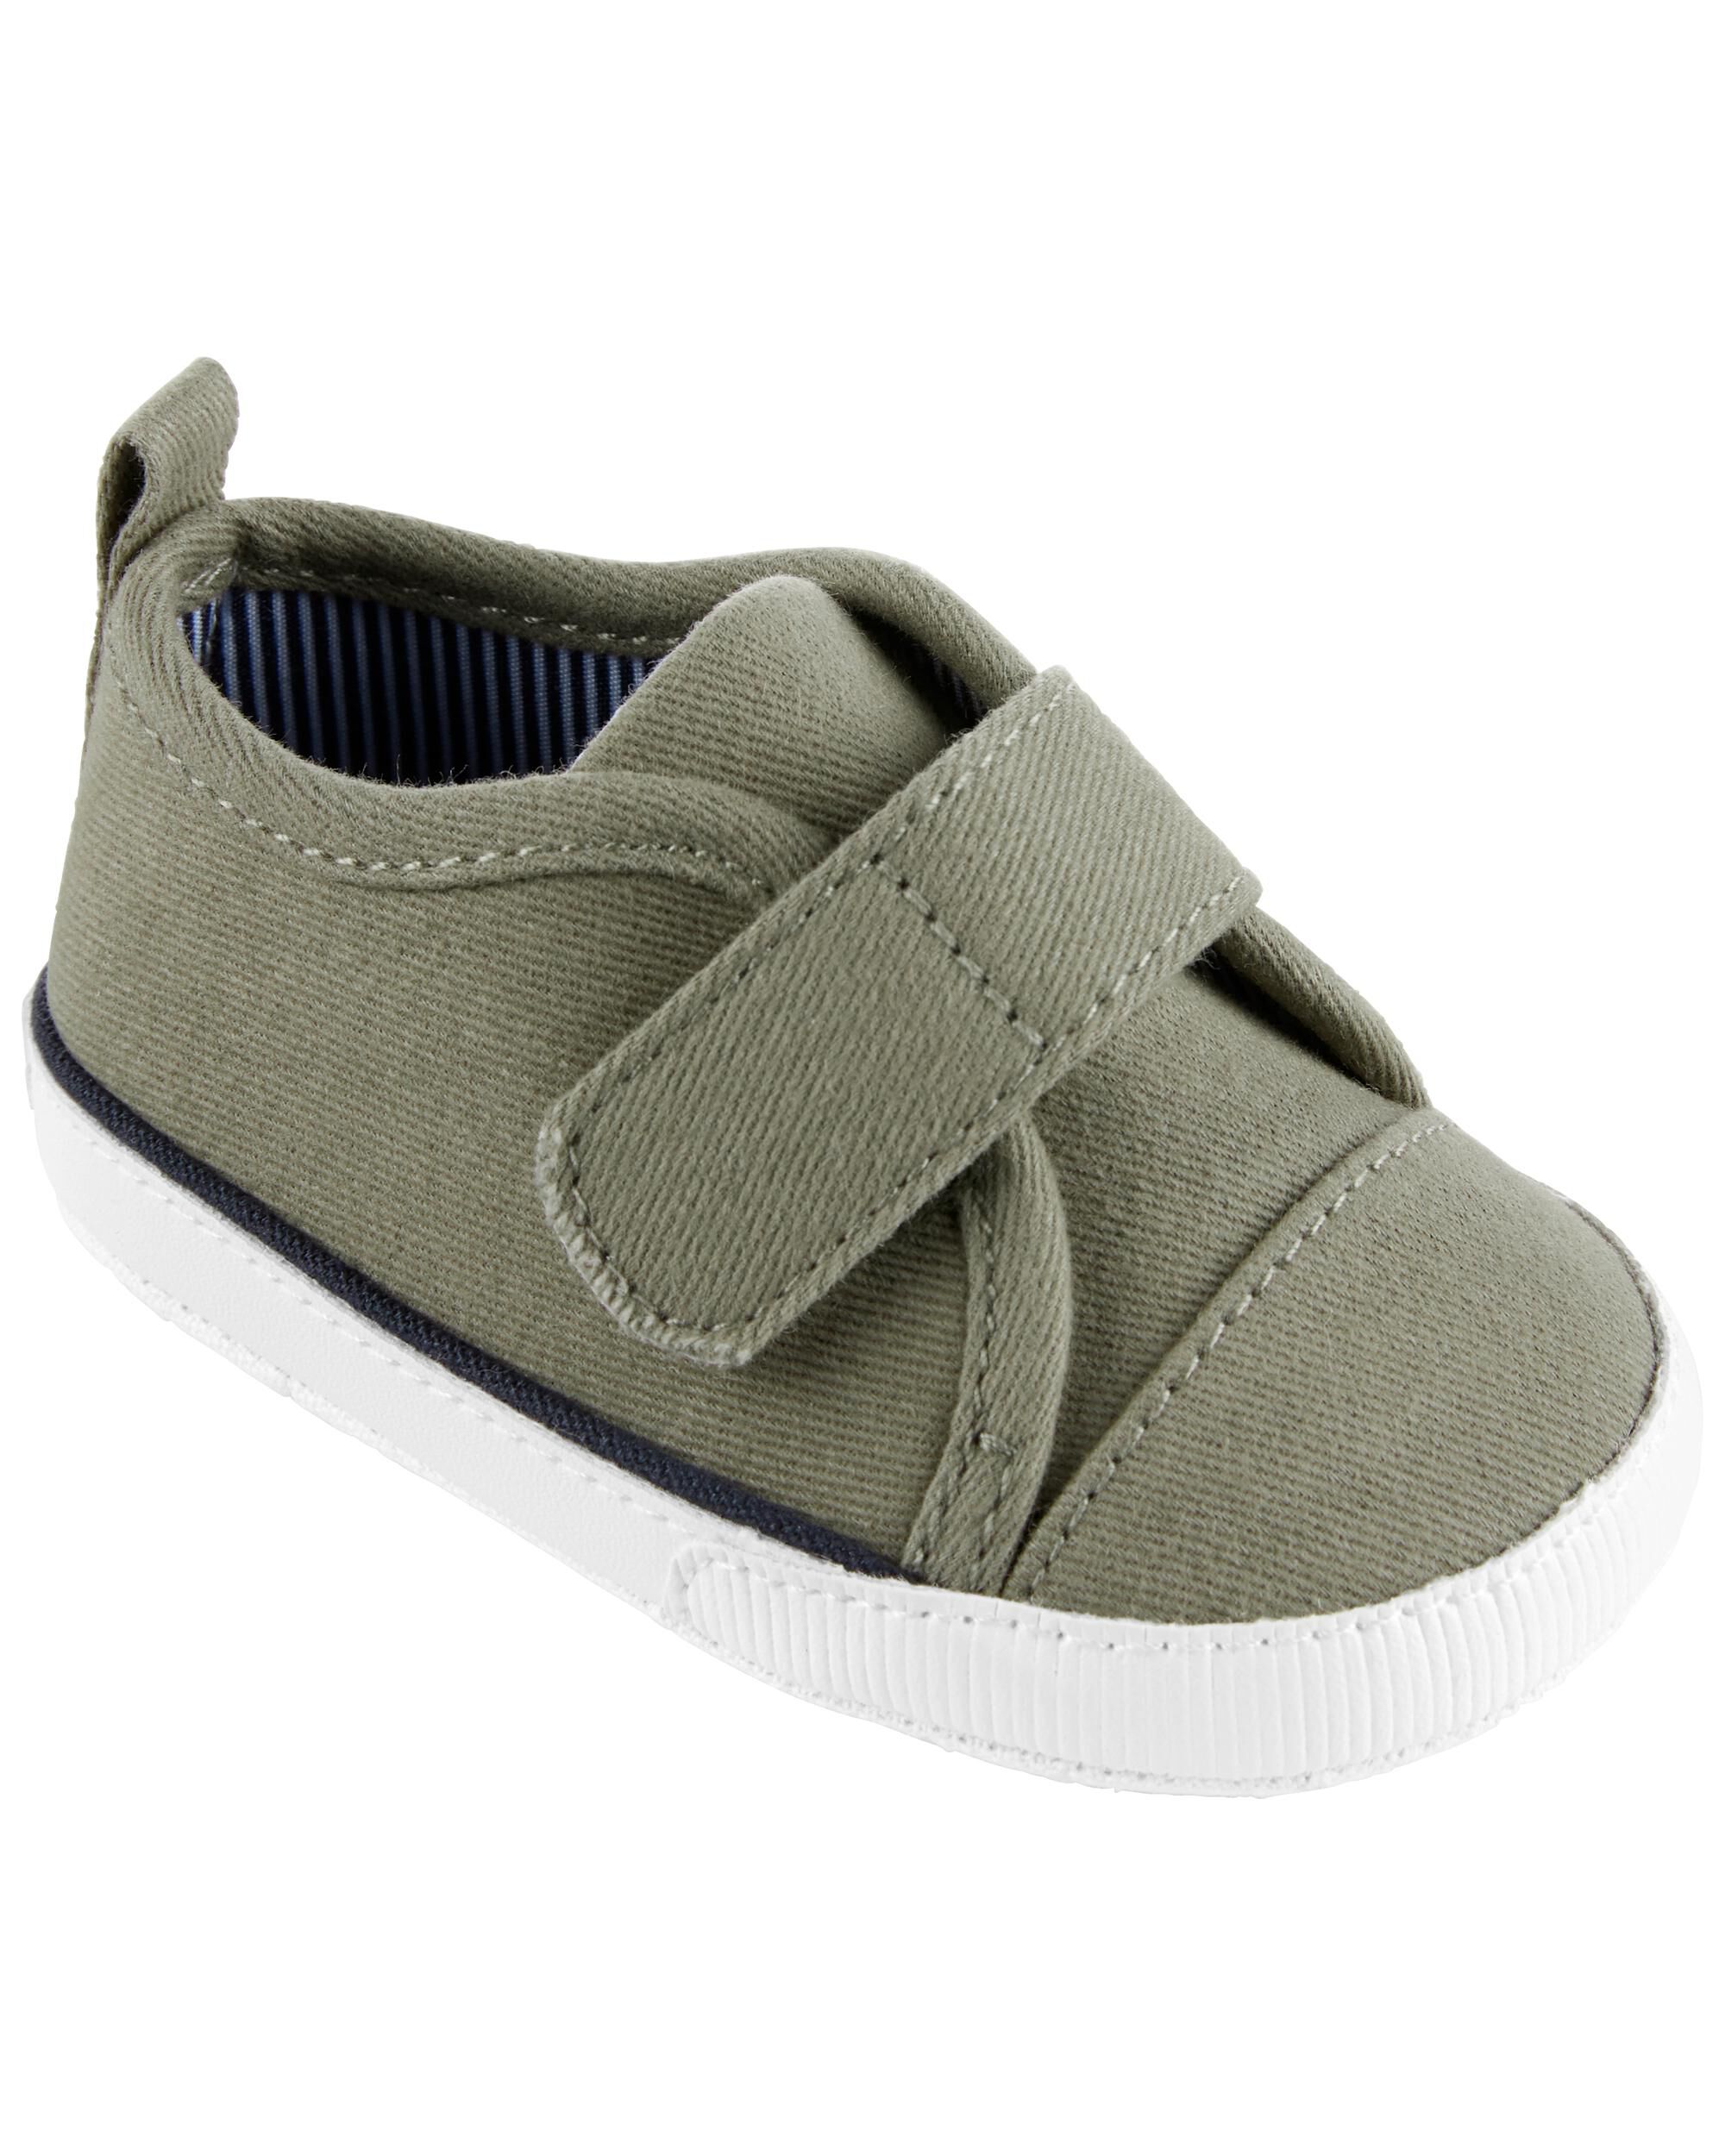 Carters Baby Shoes